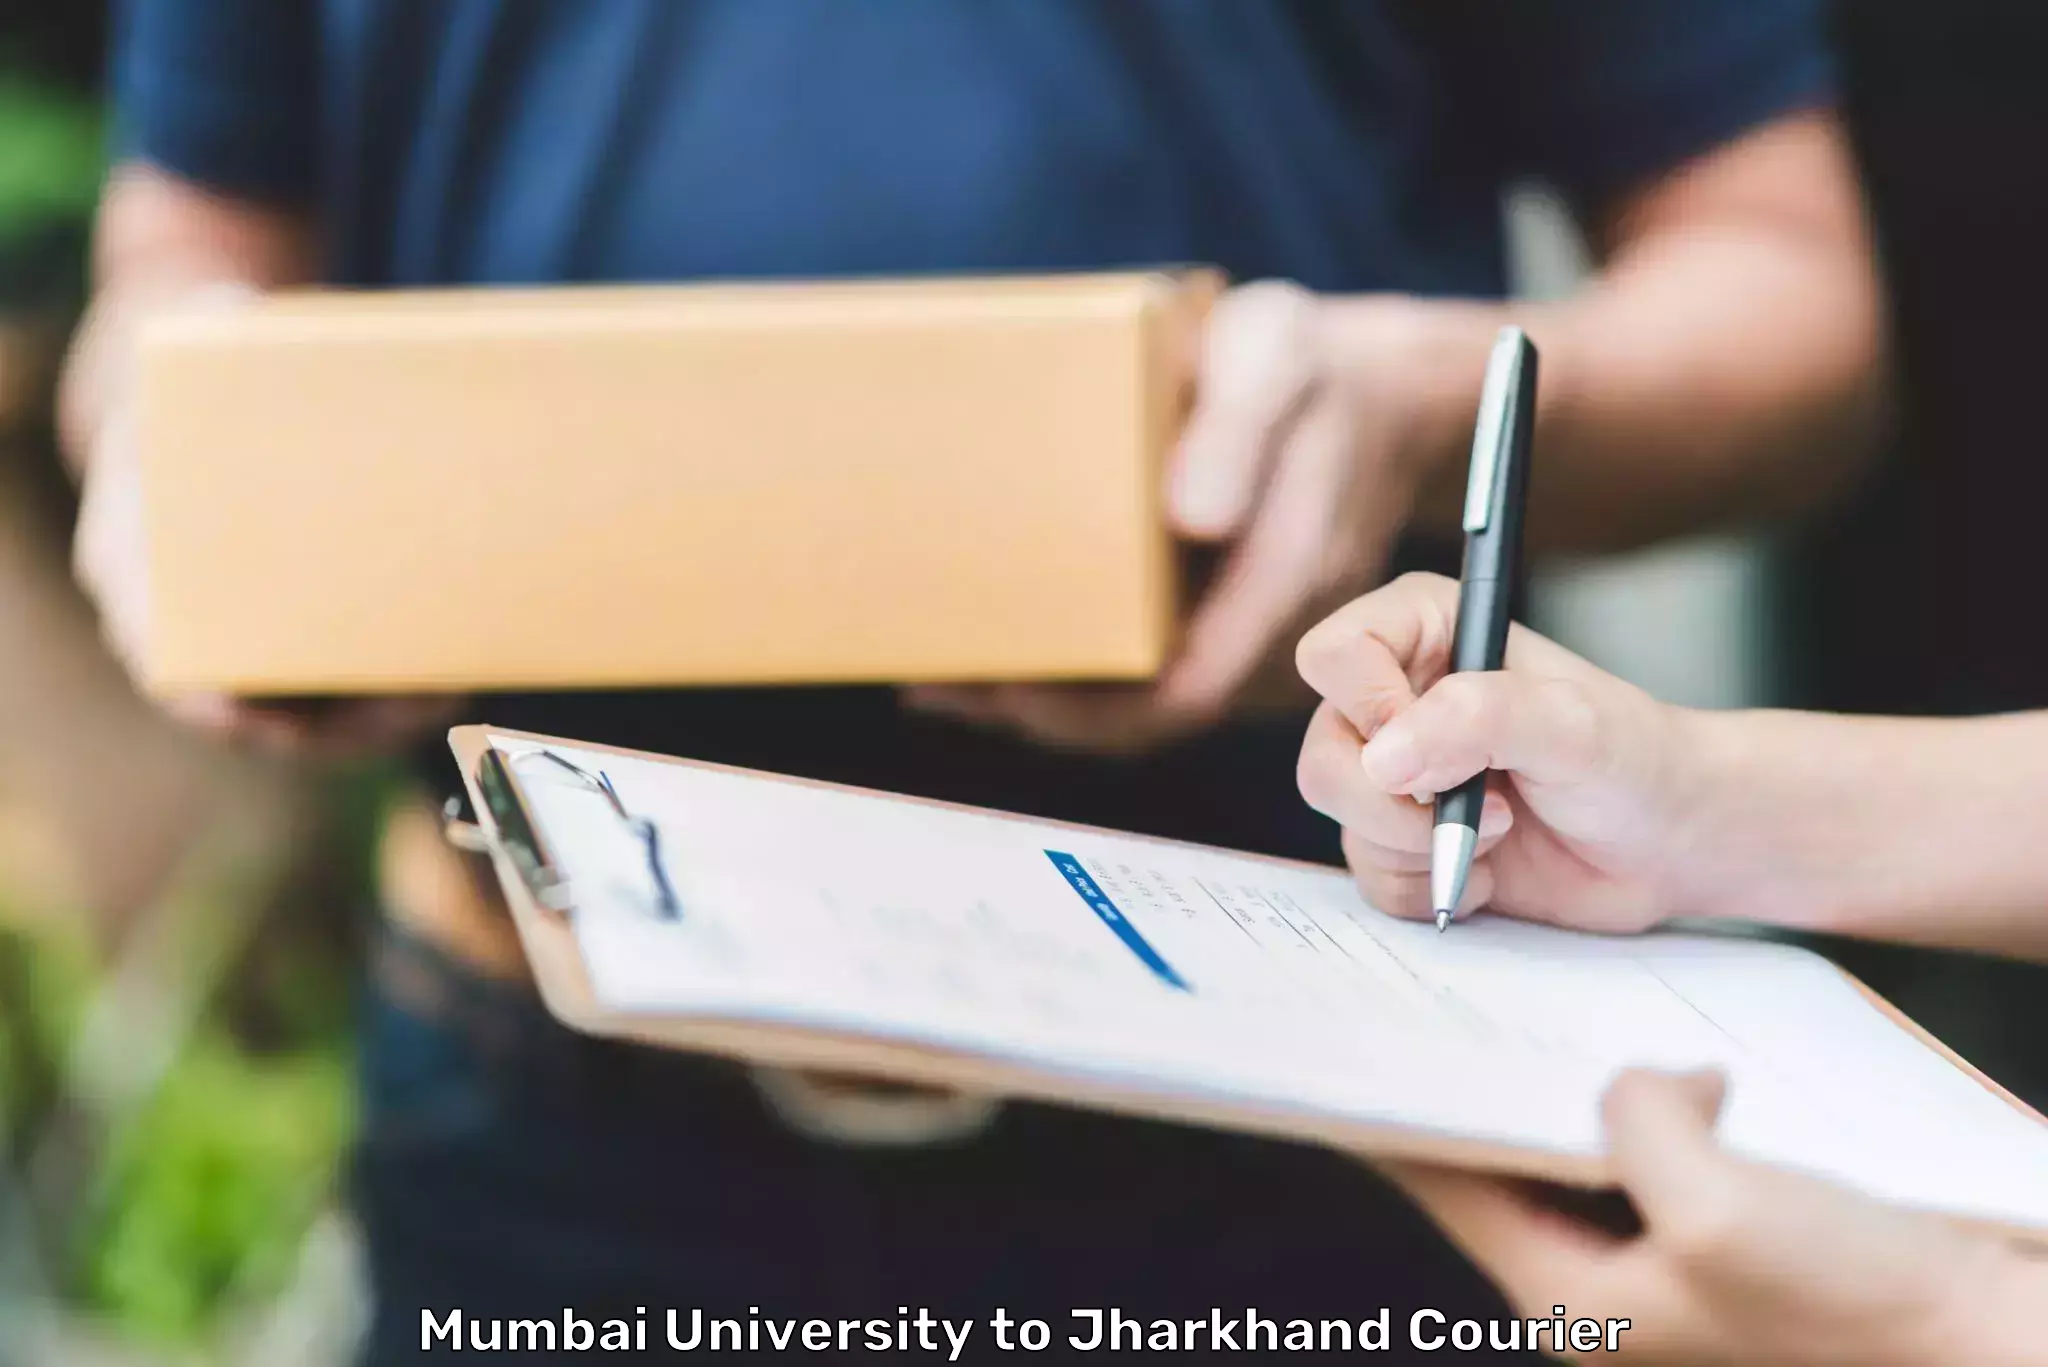 Express package delivery Mumbai University to Jharkhand